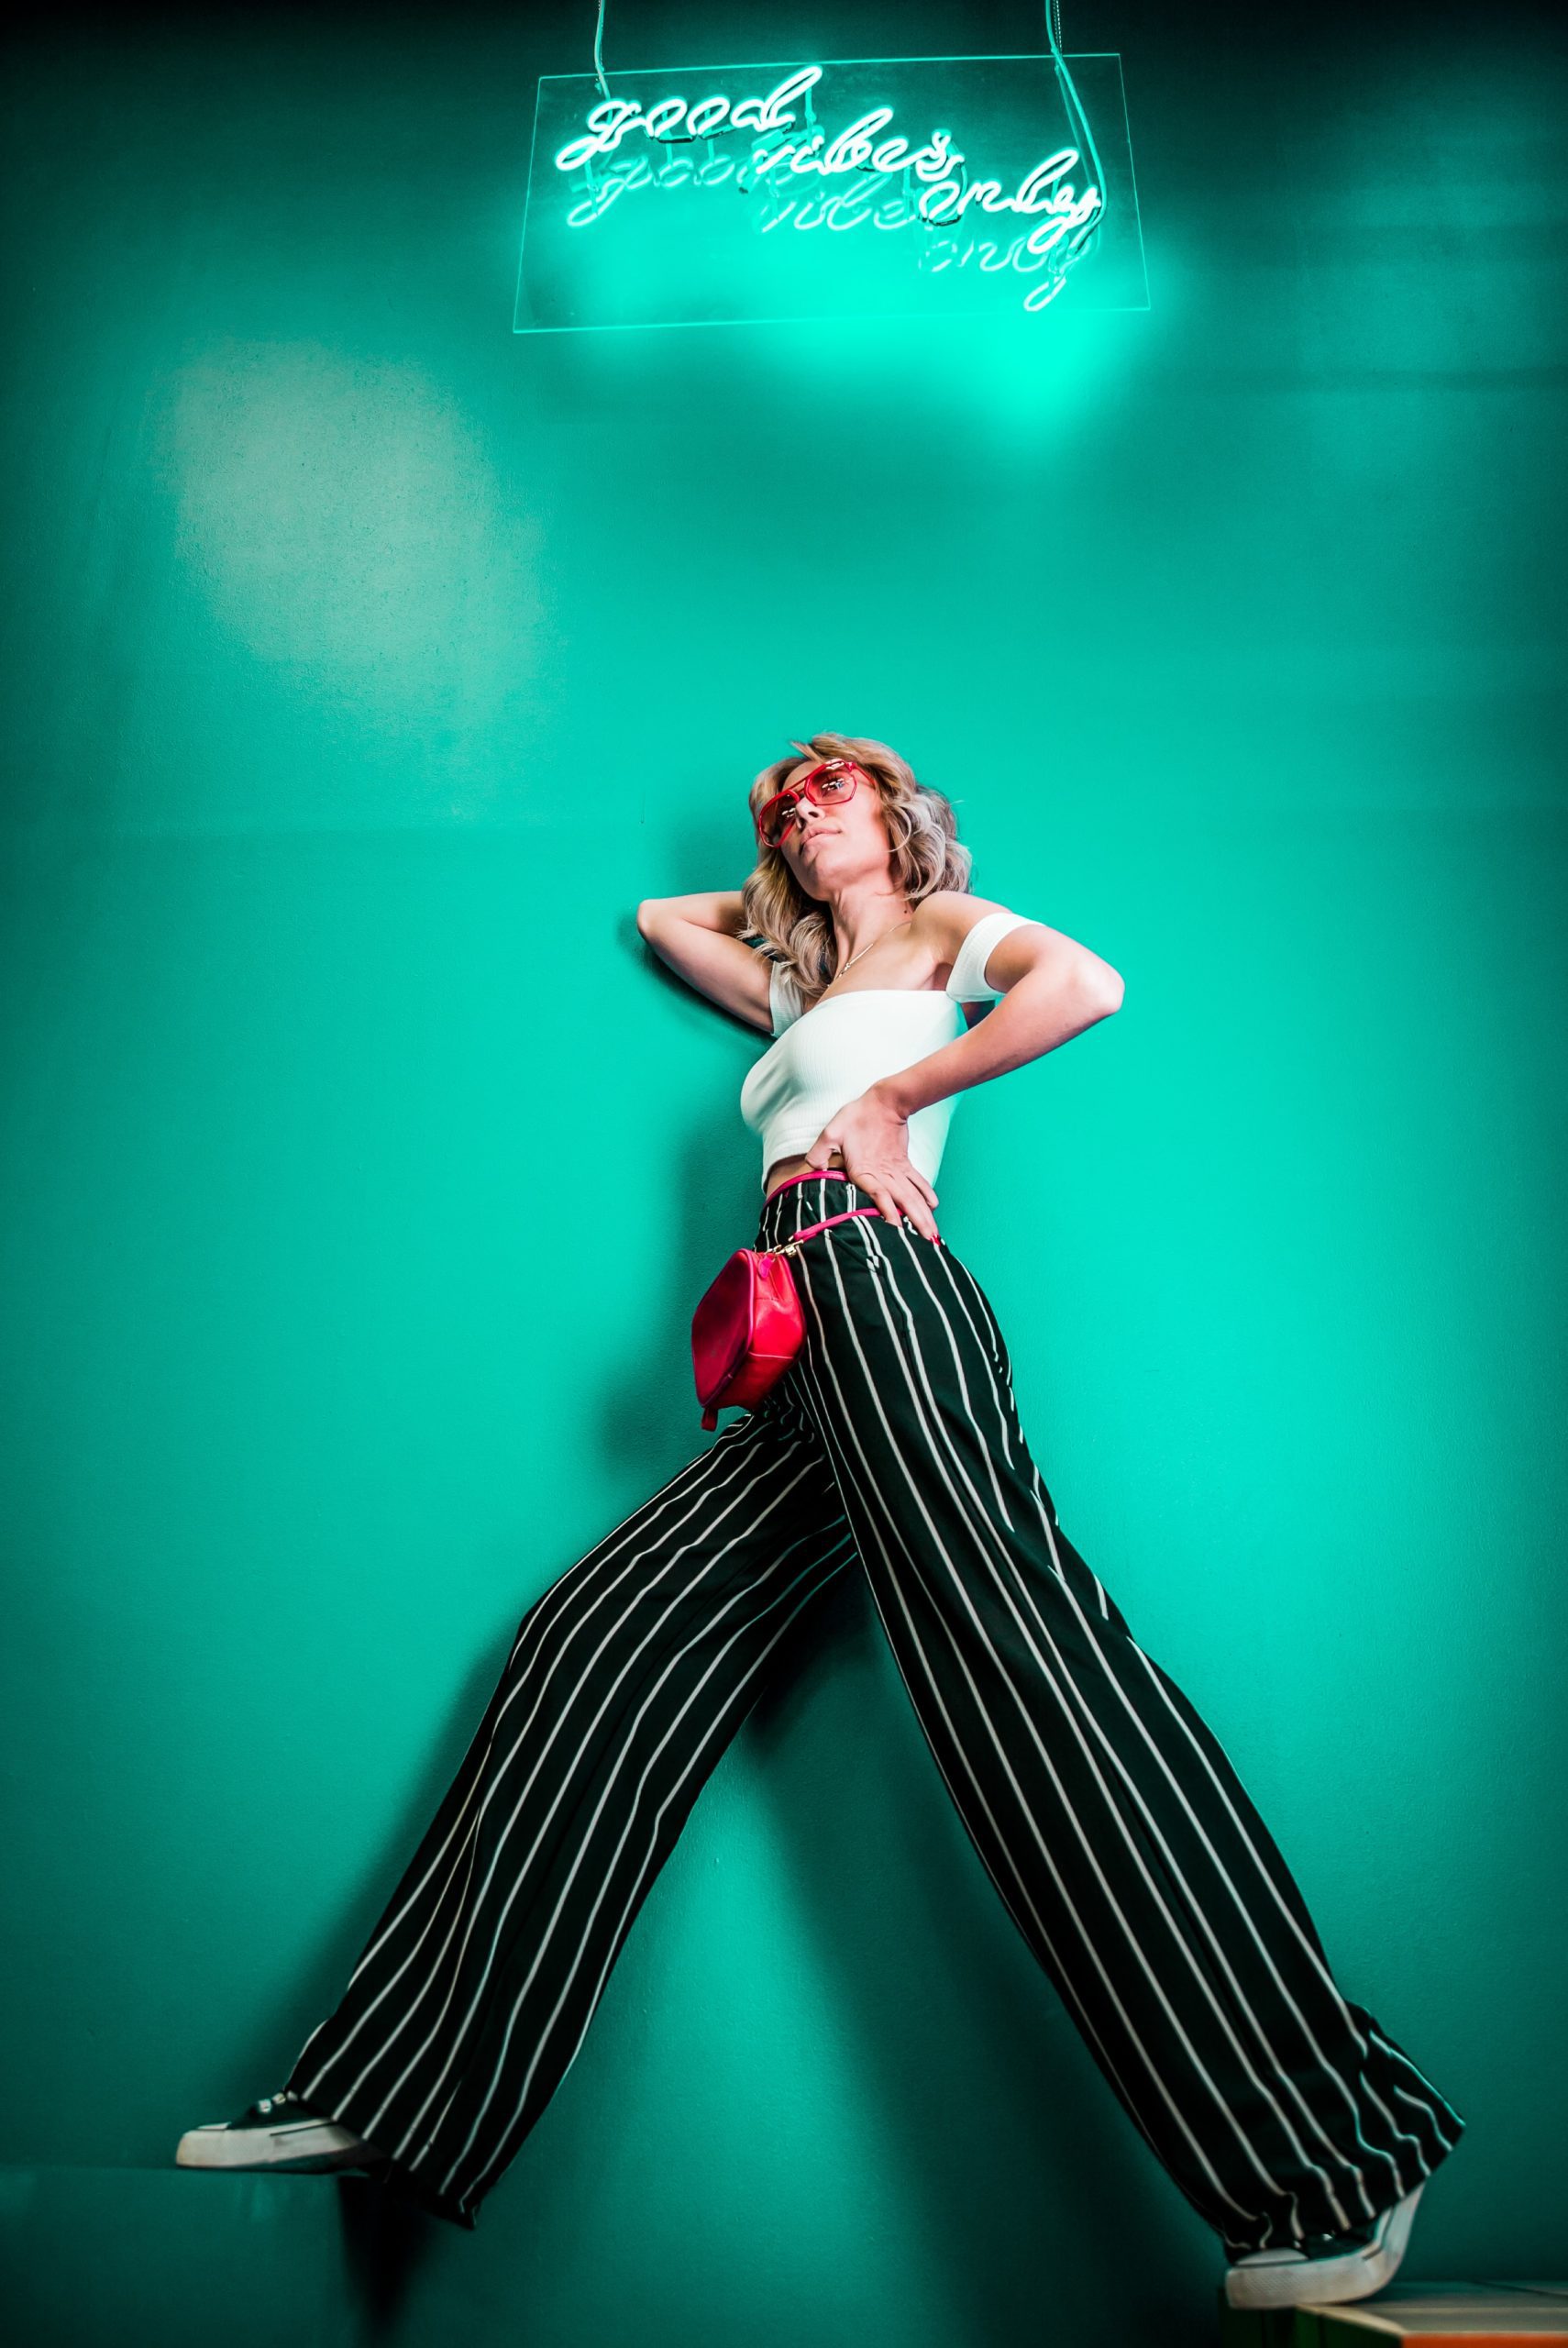 Editoral photo of a women in black and white stripped pants and a white shirt. The background is a seafoam green with a neon sign that says "good vibes only"